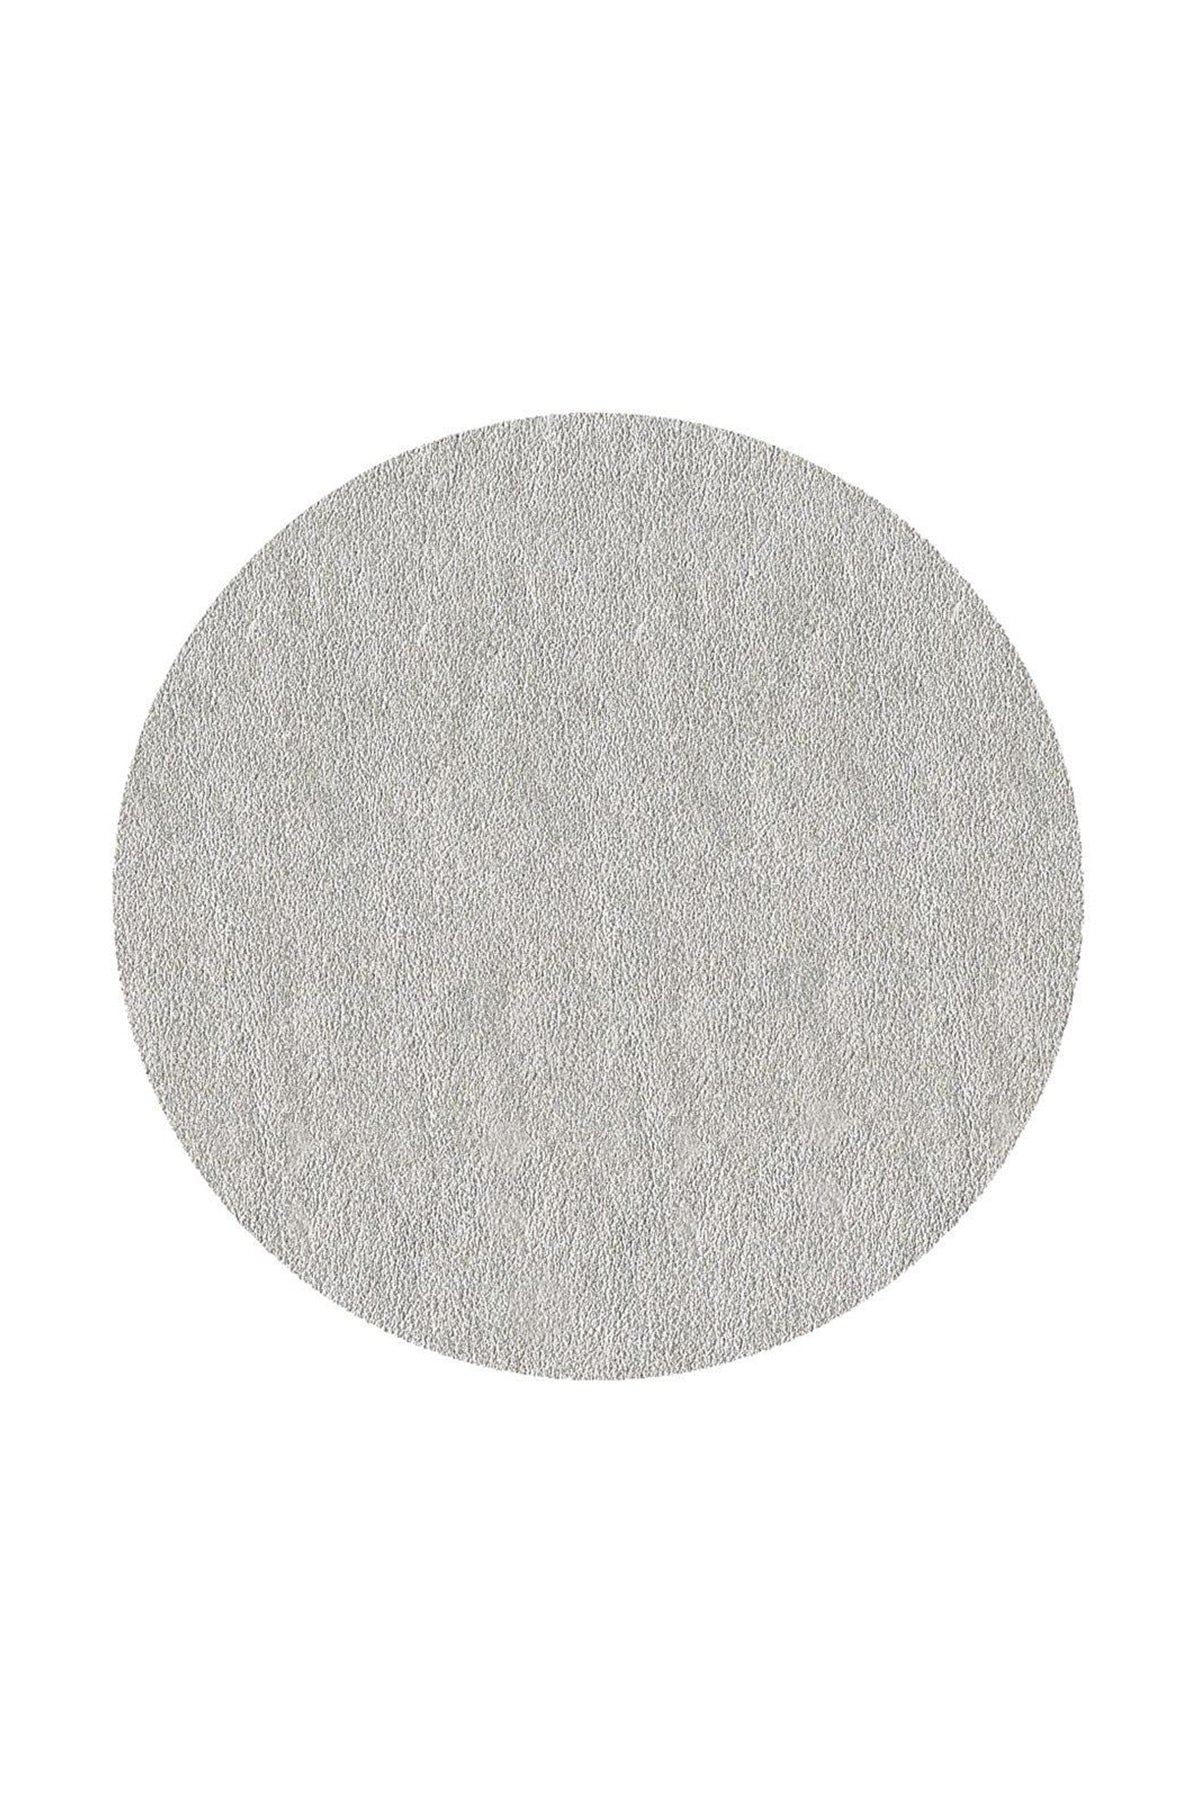 Round Luster Felt-Backed Coasters in Silver - 8 Per Box - shop-olivia.com